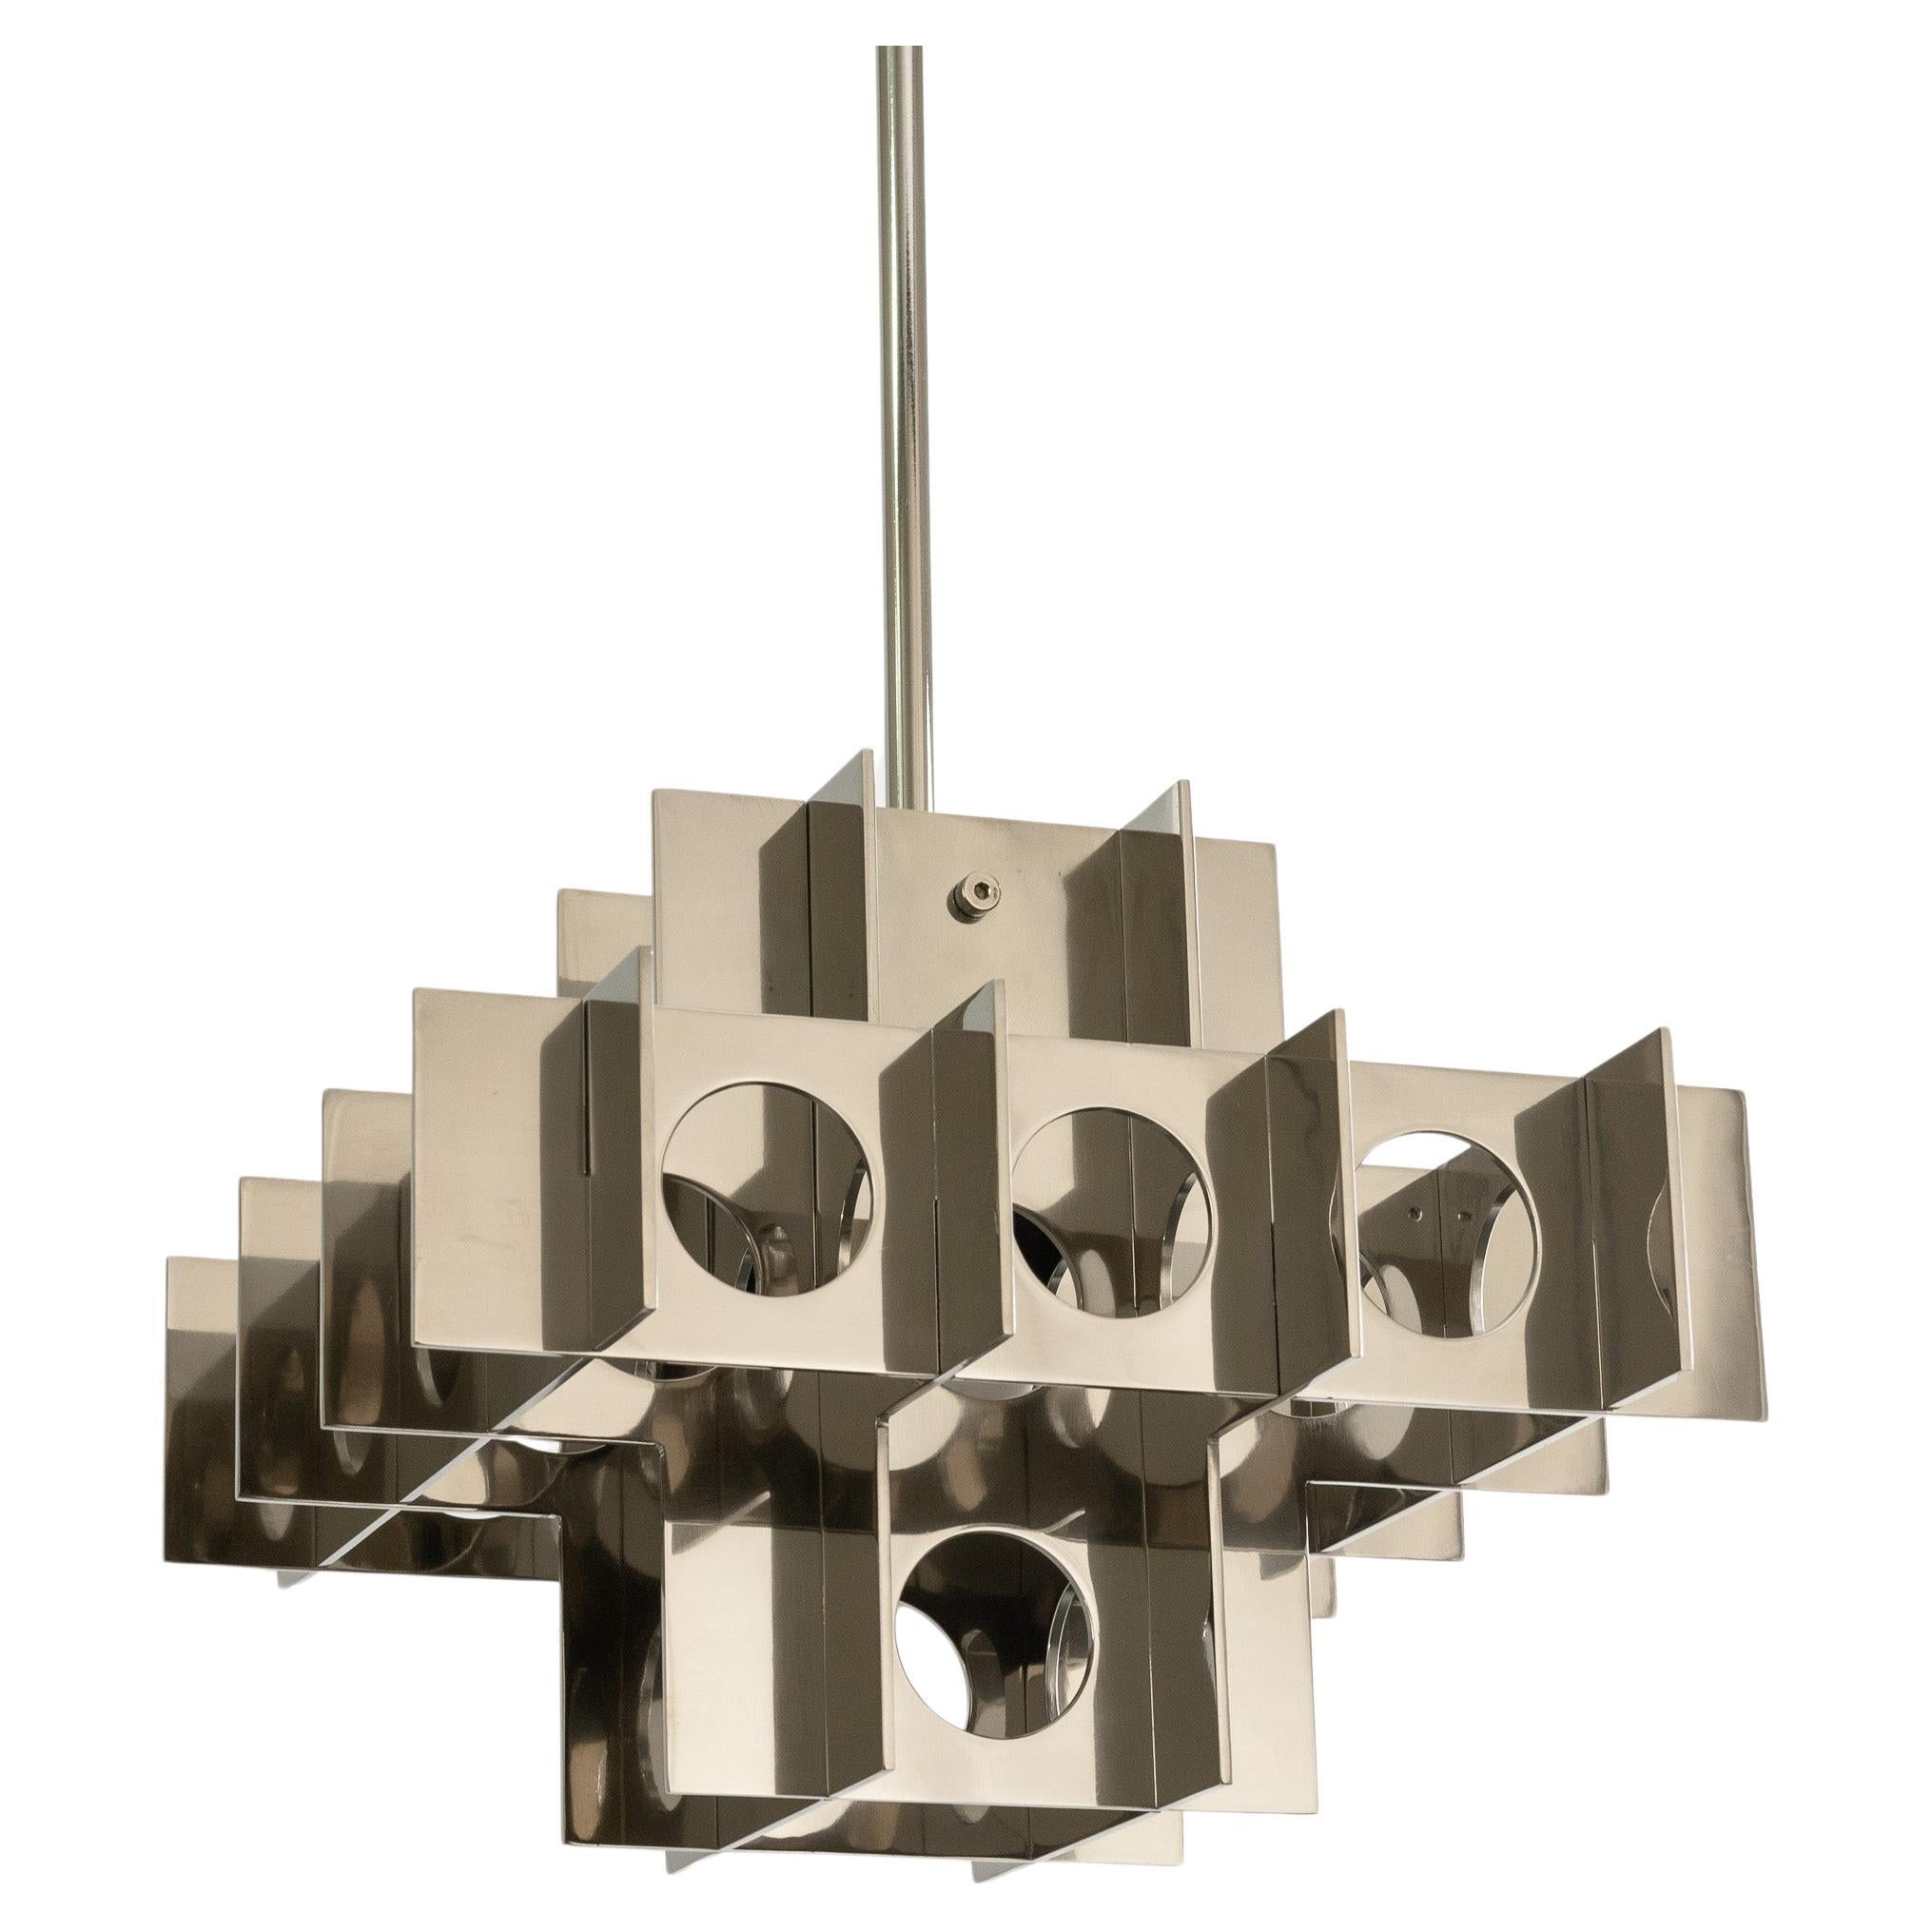 TENFOLD PENDANT 3TB 24inch by Luft Tanaka Studio

Composed of interlocking mirror polished metal panels, the Tenfold Series is inspired by the aesthetics, architectural styles, and art movements of the 1970s. The light fixture works well as a single